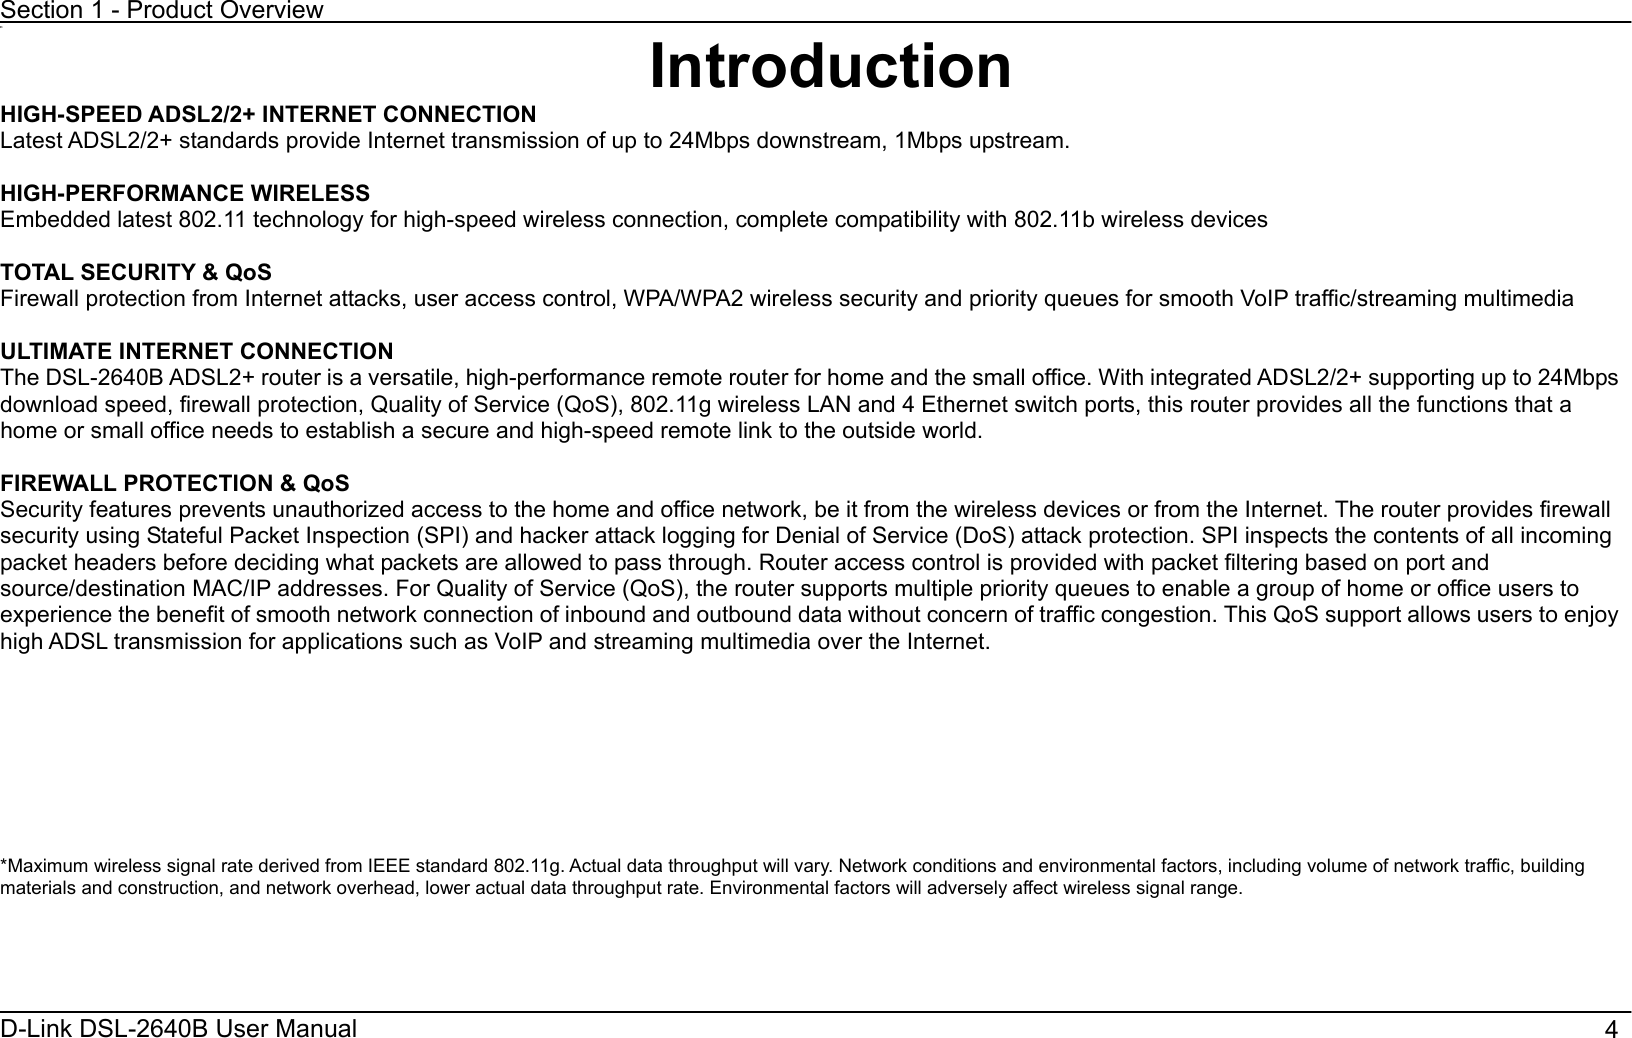 Section 1 - Product OverviewD-Link DSL-2640B User Manual                                       411IntroductionHIGH-SPEED ADSL2/2+ INTERNET CONNECTION Latest ADSL2/2+ standards provide Internet transmission of up to 24Mbps downstream, 1Mbps upstream. HIGH-PERFORMANCE WIRELESS Embedded latest 802.11 technology for high-speed wireless connection, complete compatibility with 802.11b wireless devices TOTAL SECURITY &amp; QoS   Firewall protection from Internet attacks, user access control, WPA/WPA2 wireless security and priority queues for smooth VoIP traffic/streaming multimedia ULTIMATE INTERNET CONNECTION   The DSL-2640B ADSL2+ router is a versatile, high-performance remote router for home and the small office. With integrated ADSL2/2+ supporting up to 24Mbps download speed, firewall protection, Quality of Service (QoS), 802.11g wireless LAN and 4 Ethernet switch ports, this router provides all the functions that a home or small office needs to establish a secure and high-speed remote link to the outside world. FIREWALL PROTECTION &amp; QoS Security features prevents unauthorized access to the home and office network, be it from the wireless devices or from the Internet. The router provides firewall security using Stateful Packet Inspection (SPI) and hacker attack logging for Denial of Service (DoS) attack protection. SPI inspects the contents of all incoming packet headers before deciding what packets are allowed to pass through. Router access control is provided with packet filtering based on port and source/destination MAC/IP addresses. For Quality of Service (QoS), the router supports multiple priority queues to enable a group of home or office users to experience the benefit of smooth network connection of inbound and outbound data without concern of traffic congestion. This QoS support allows users to enjoy high ADSL transmission for applications such as VoIP and streaming multimedia over the Internet.   *Maximum wireless signal rate derived from IEEE standard 802.11g. Actual data throughput will vary. Network conditions and environmental factors, including volume of network traffic, building materials and construction, and network overhead, lower actual data throughput rate. Environmental factors will adversely affect wireless signal range. 